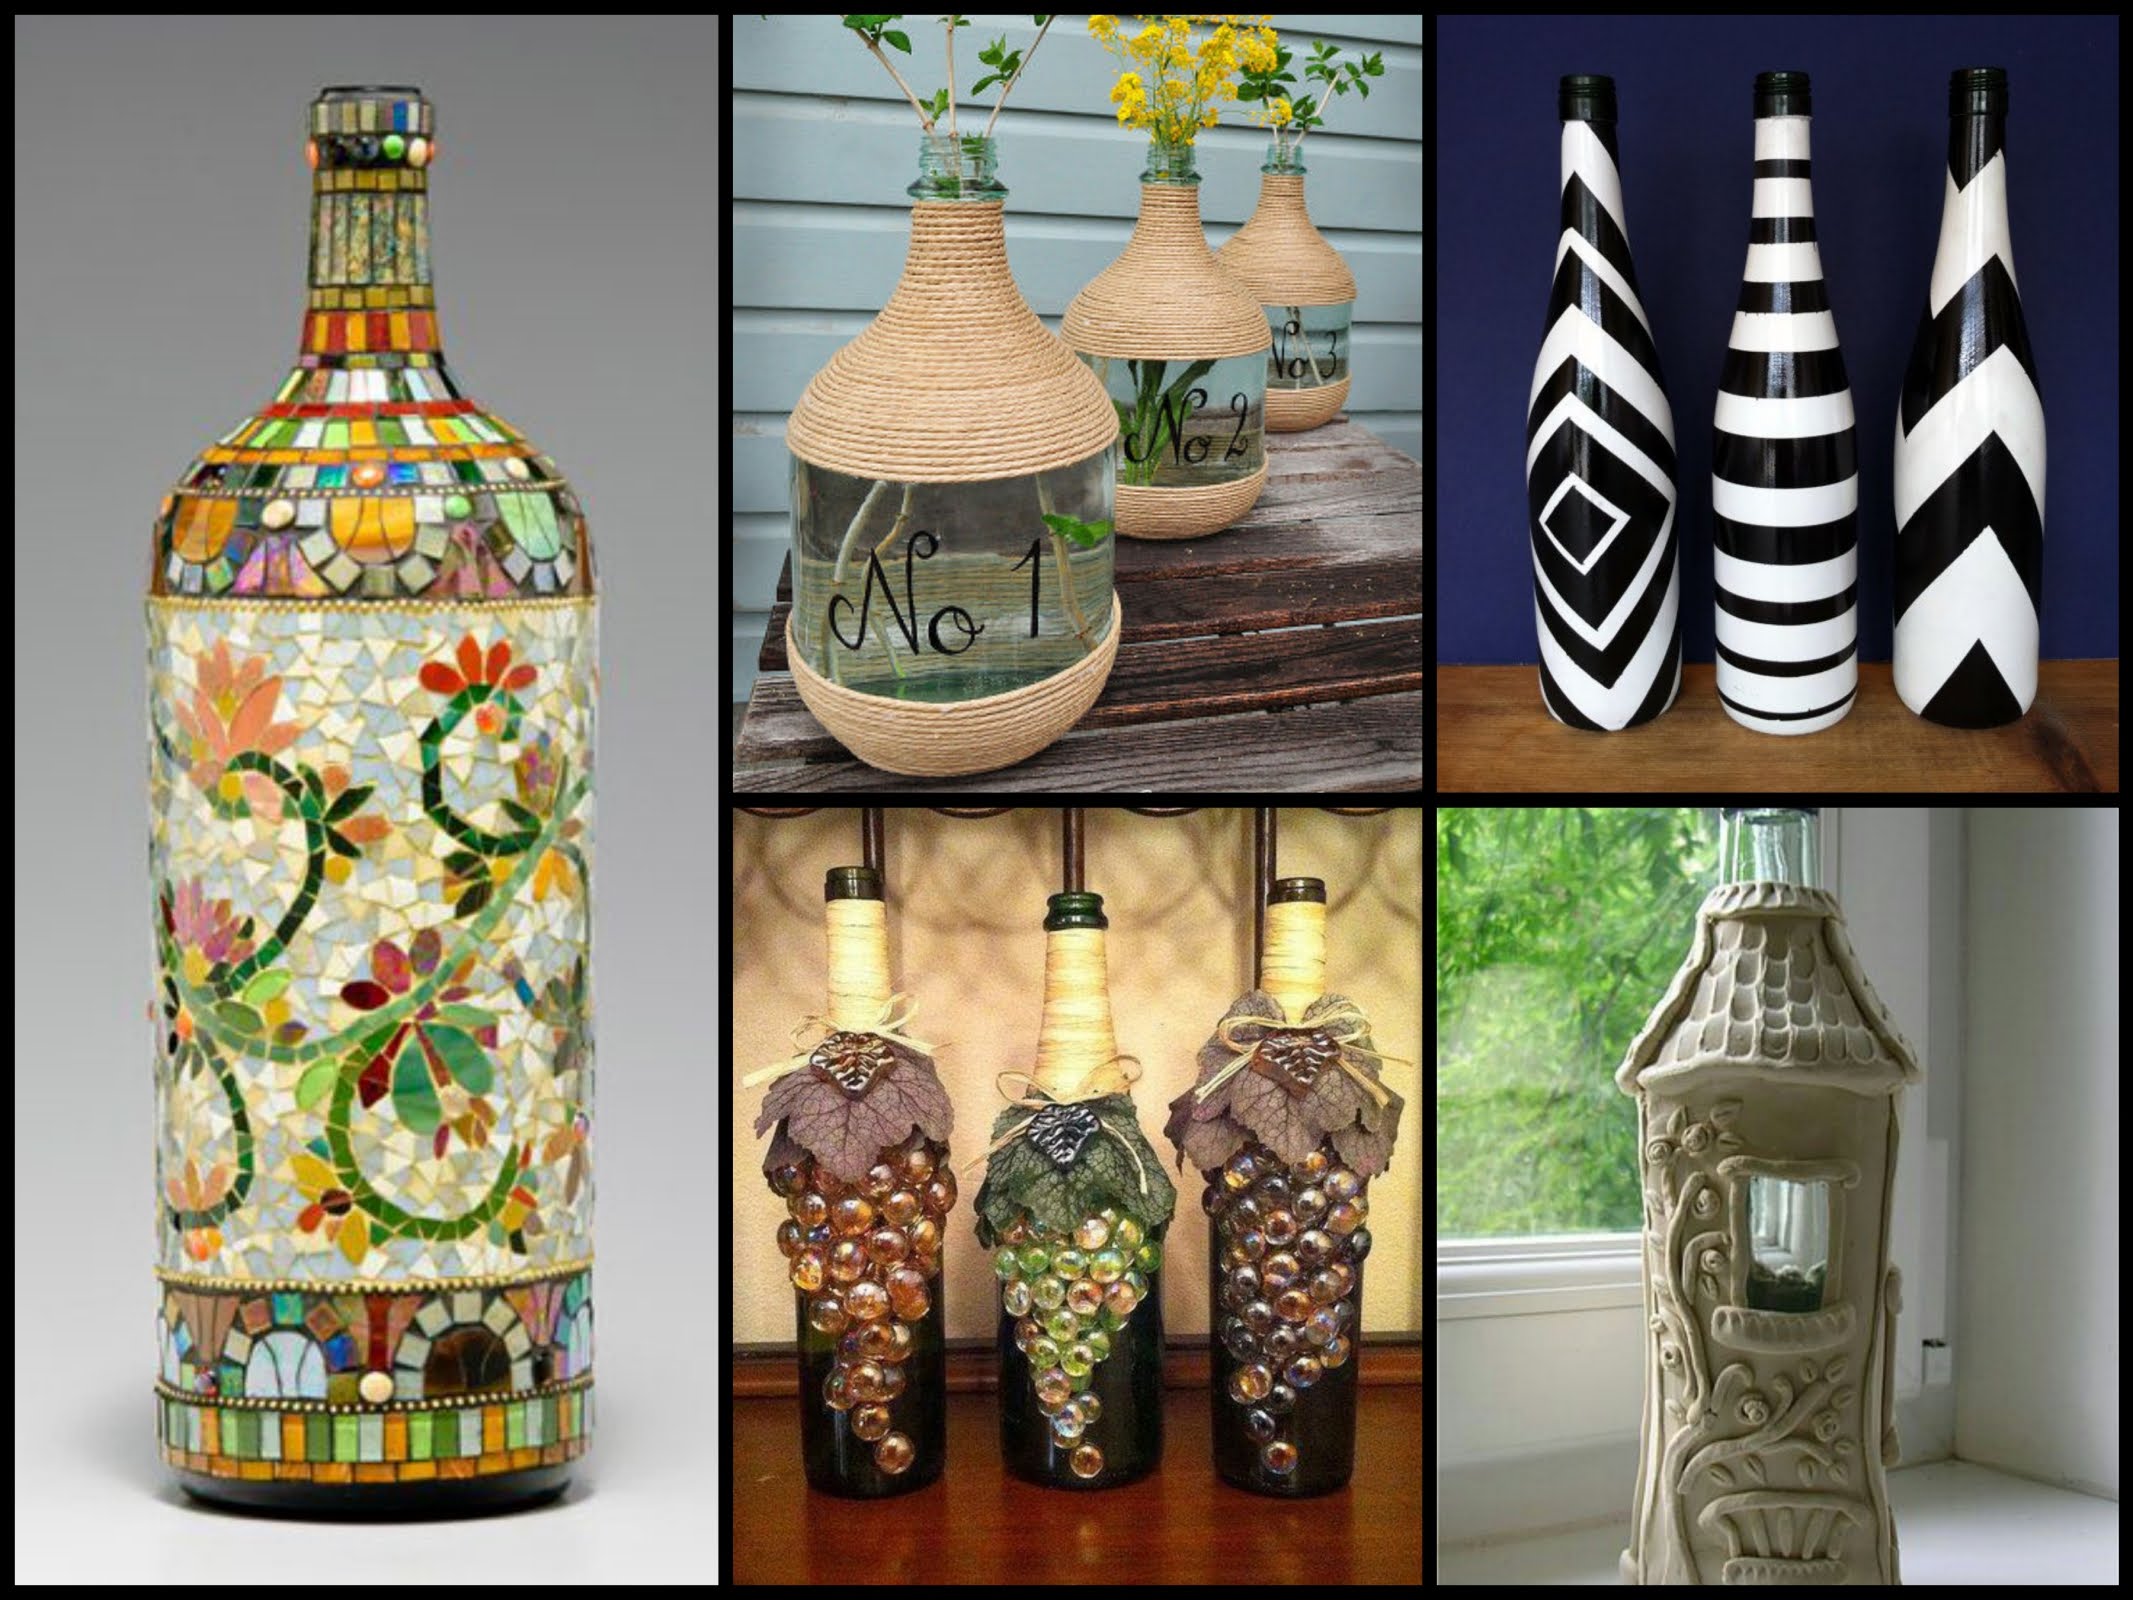 50+ Beautiful Bottle Decorating Ideas – DIY Recycled Room Decor ...